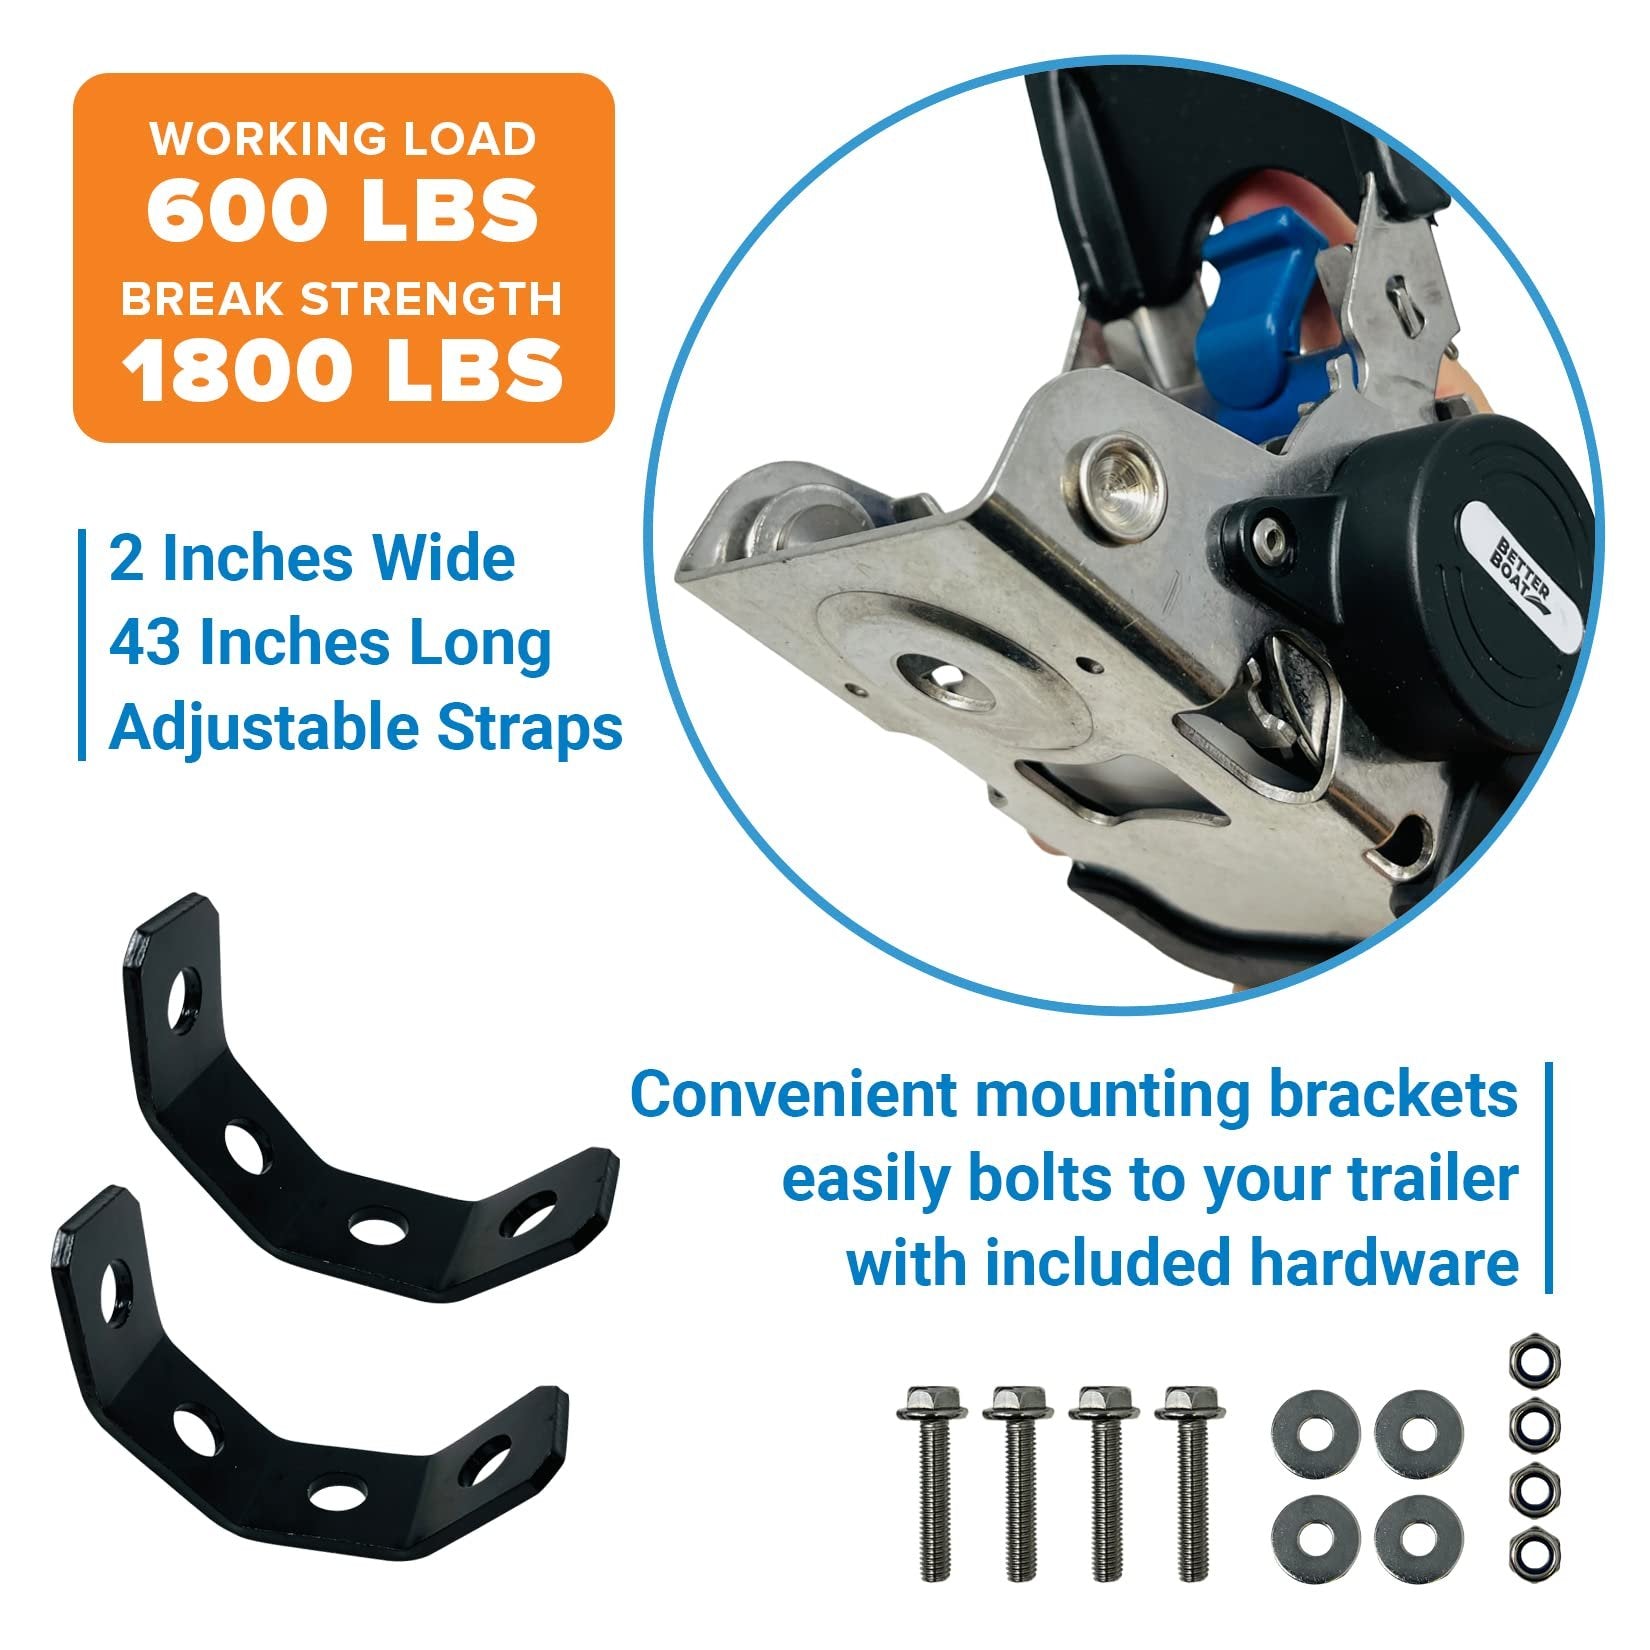 2x43 Blue Stainless Retractable Ratchet Straps - Heavy Duty Set with Mounting Brackets & Bolts - Self-Retracting Buckle for Cargo